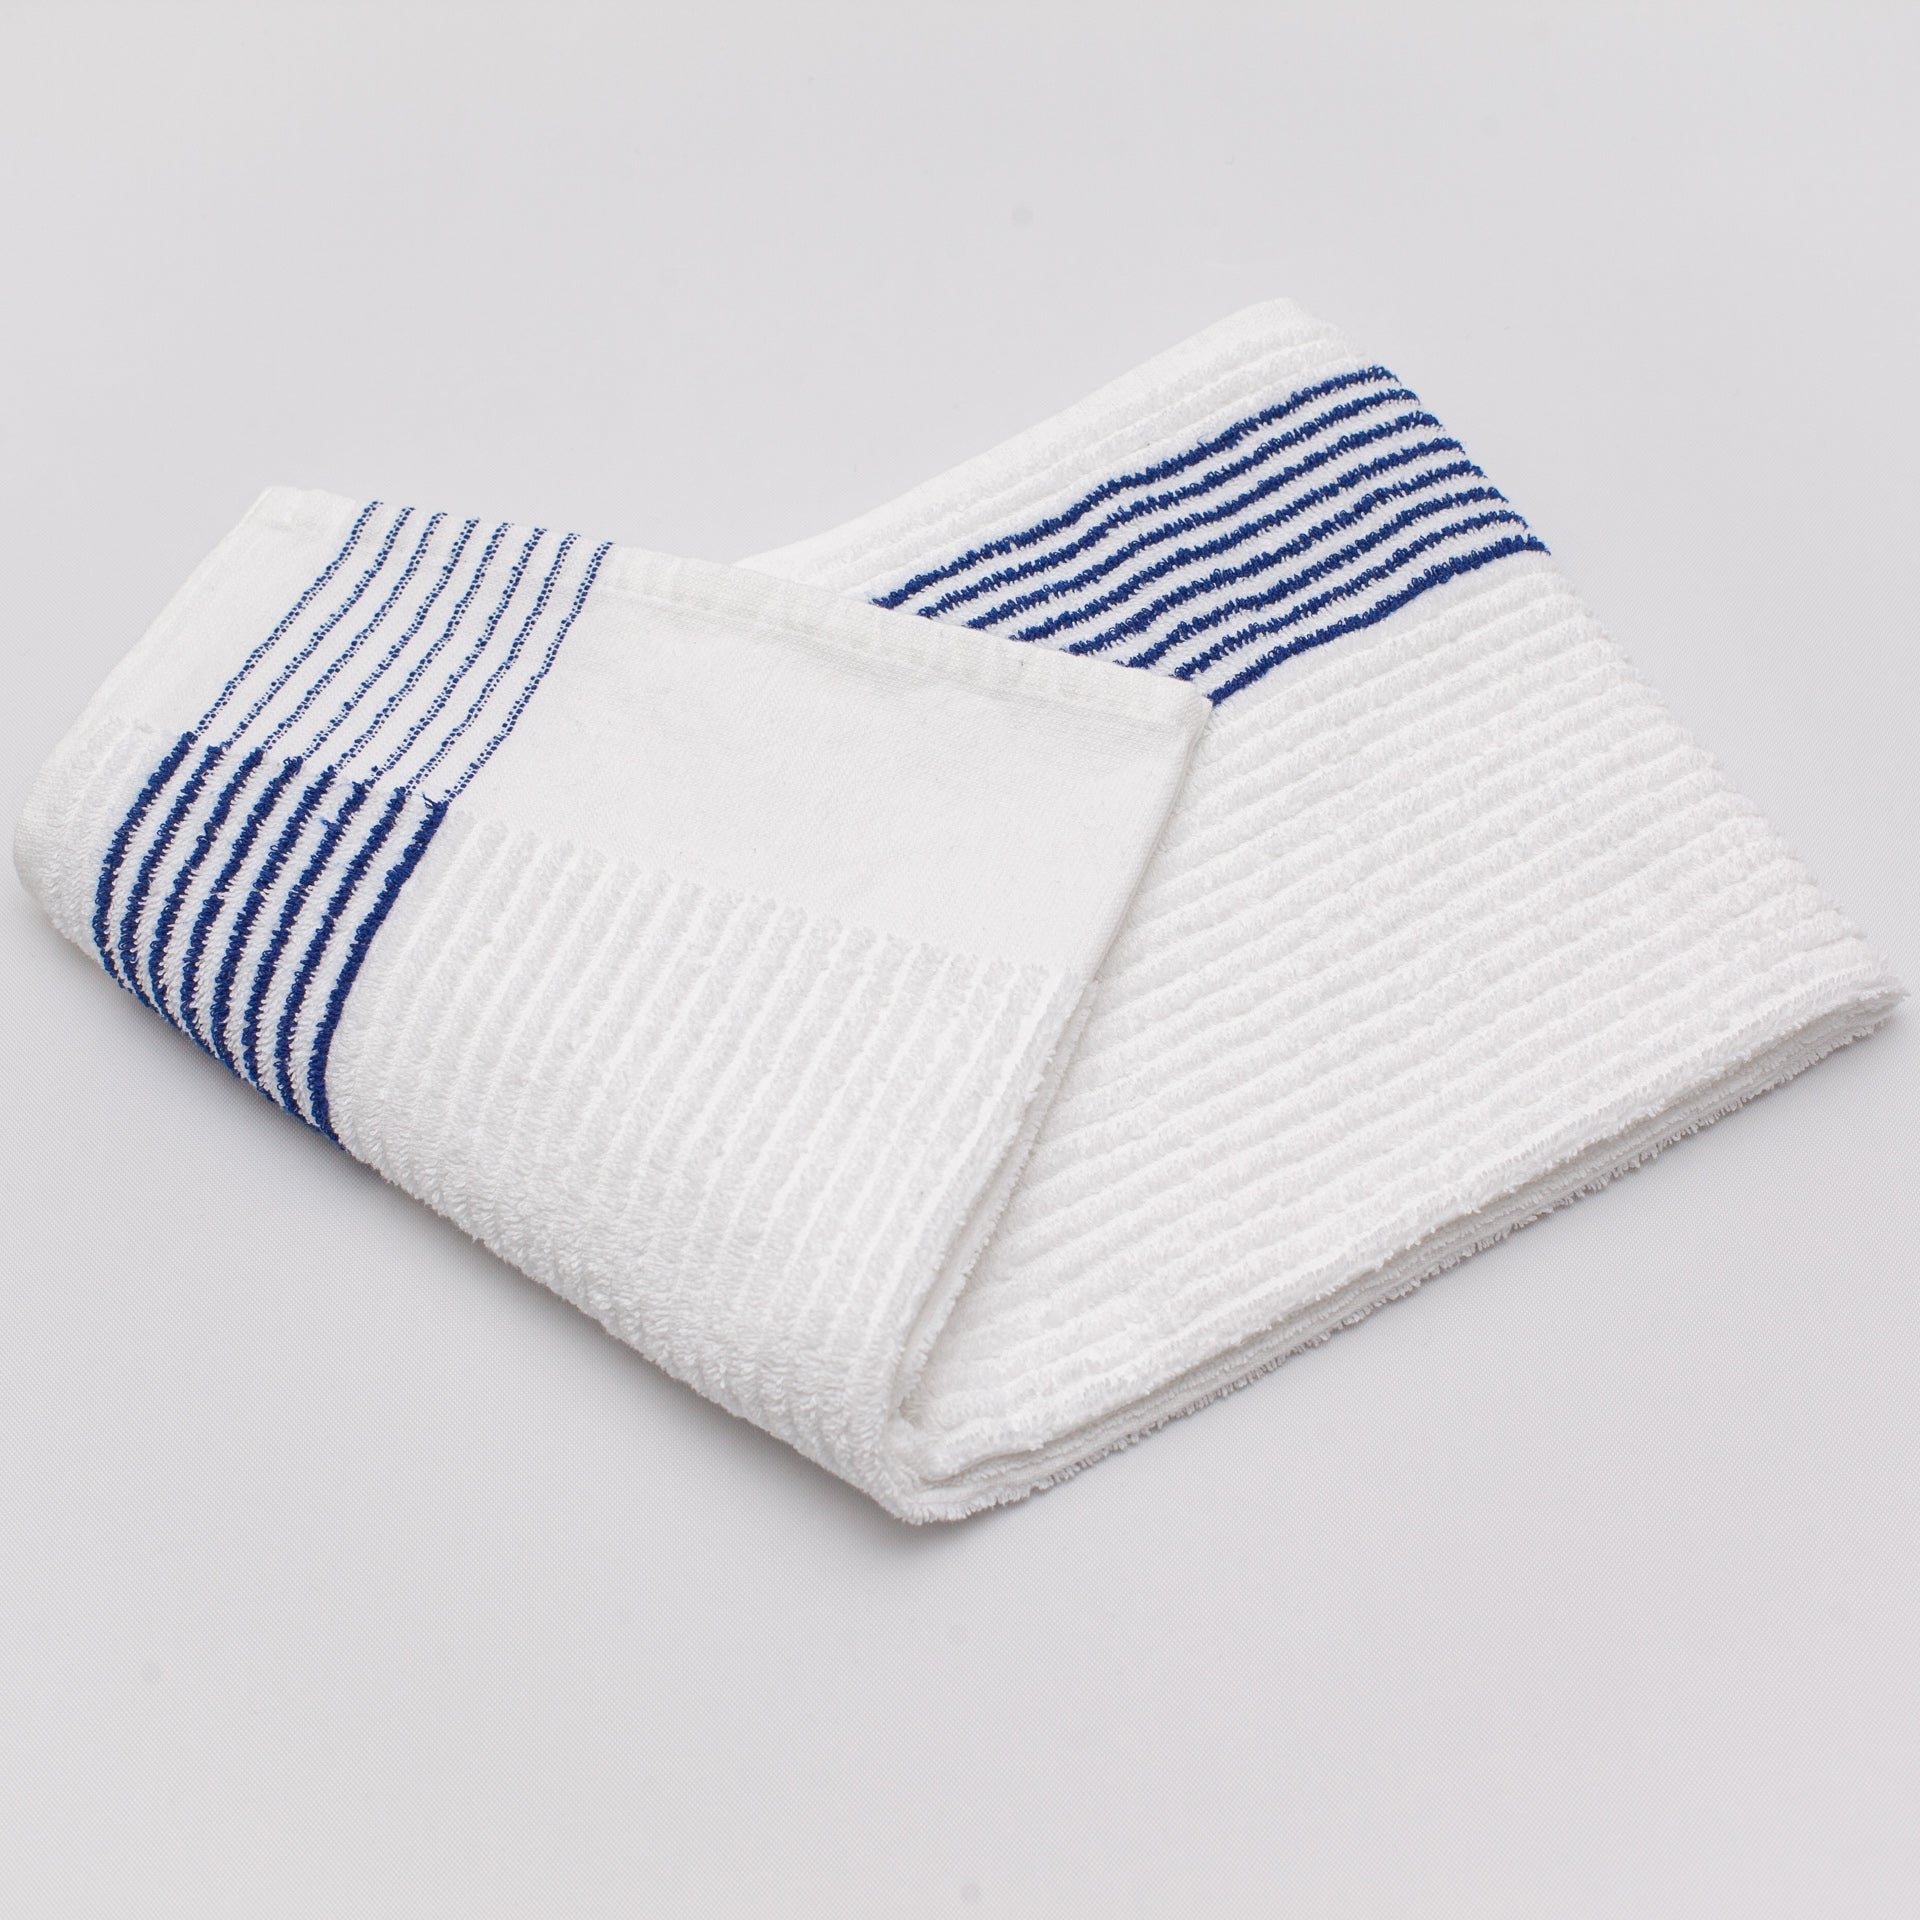 blue striped caddy towel folded on a white background